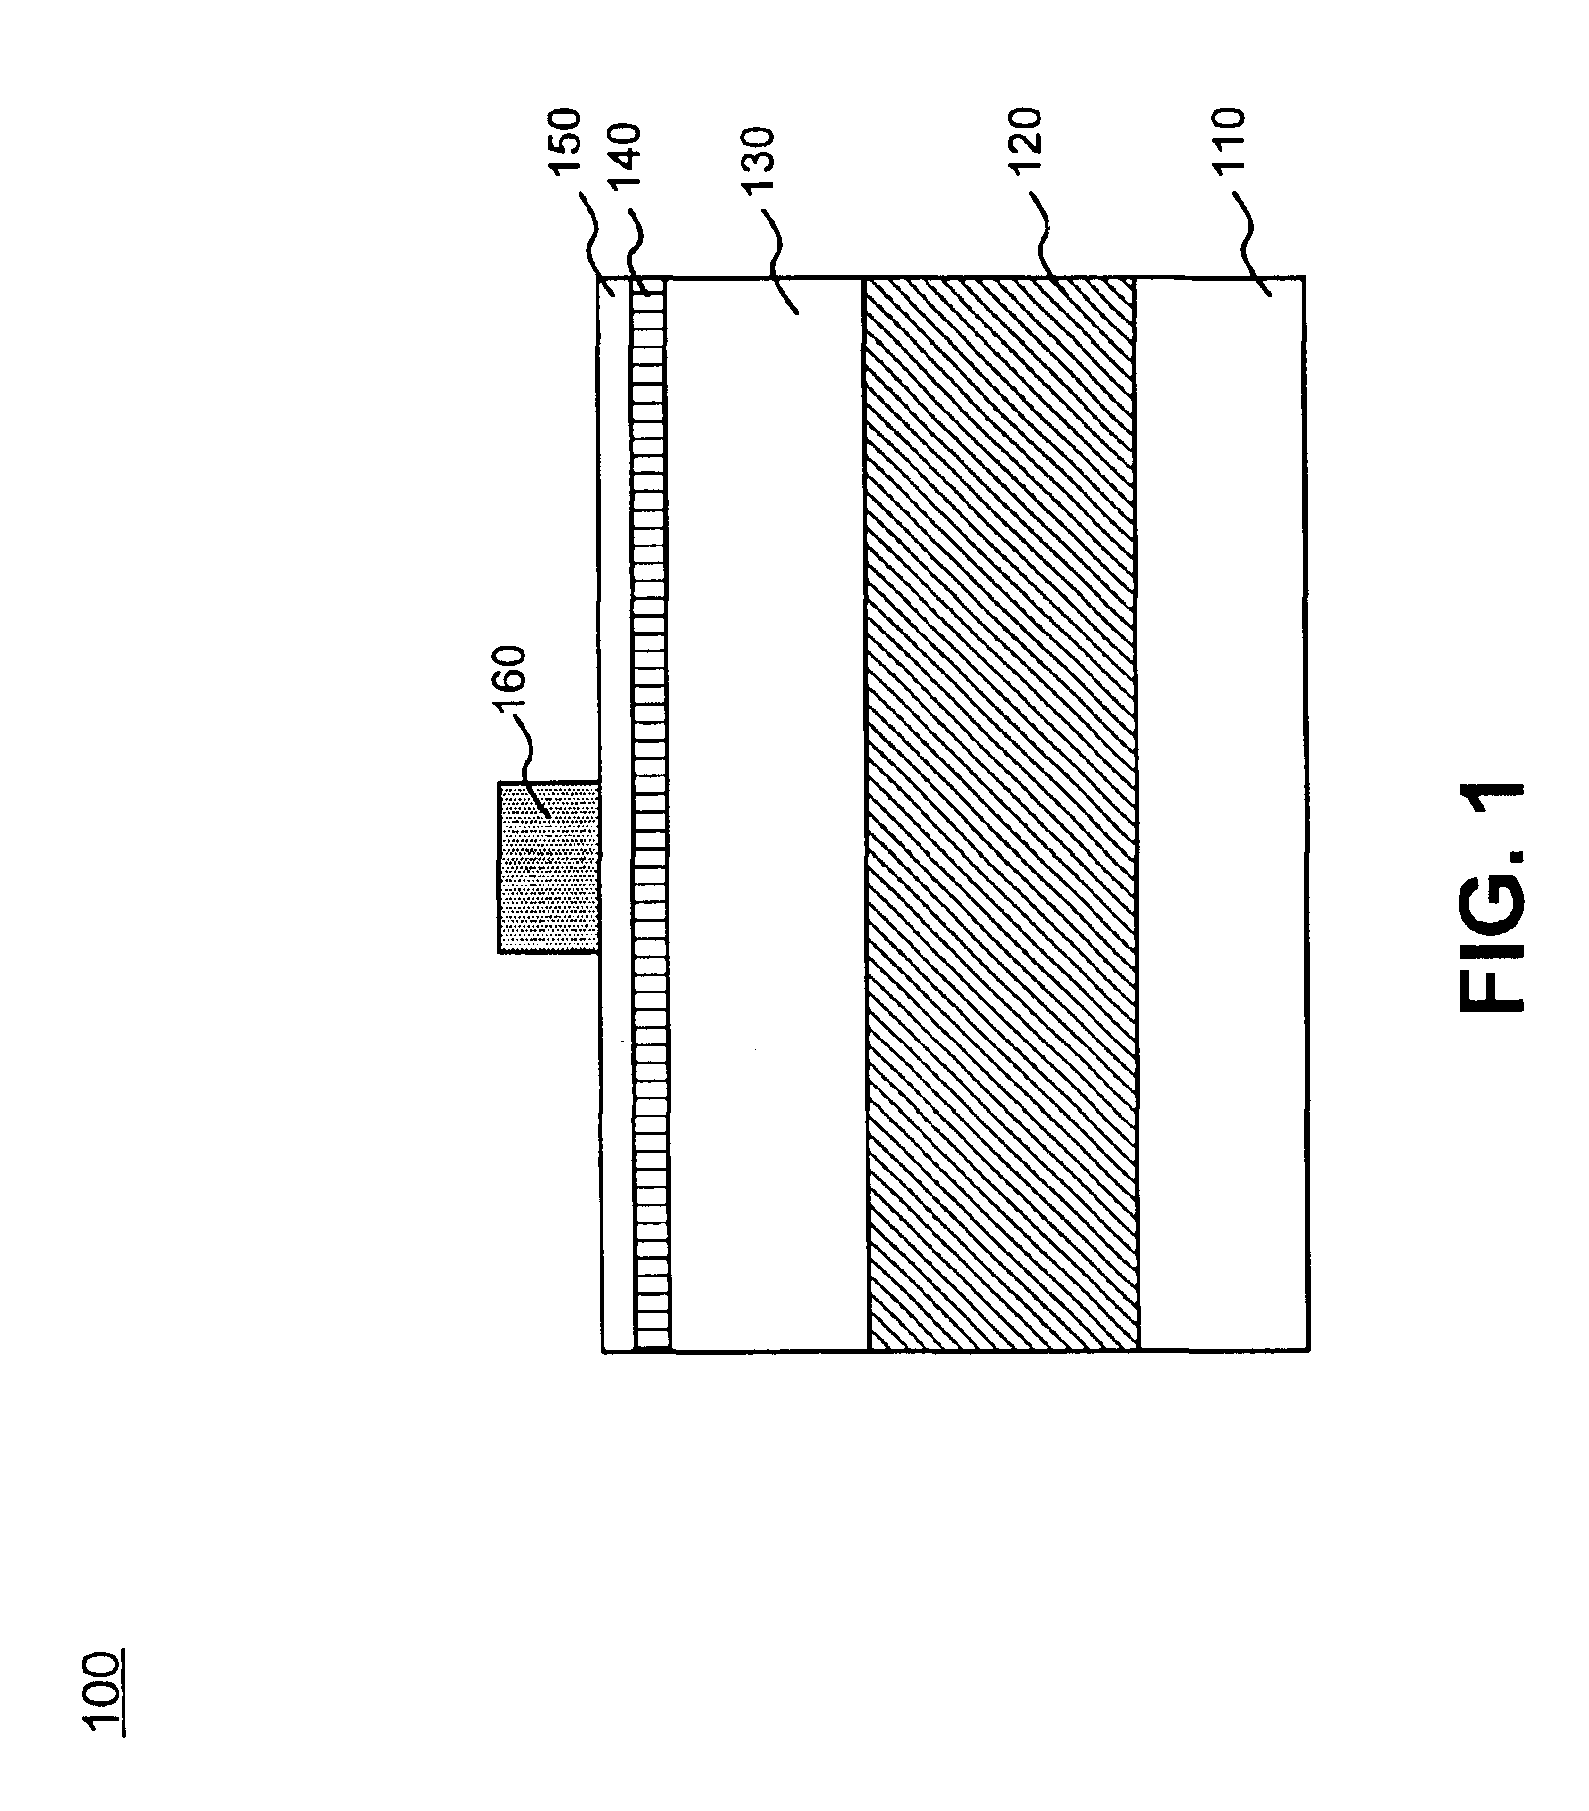 Semiconductor device having a gate structure surrounding a fin